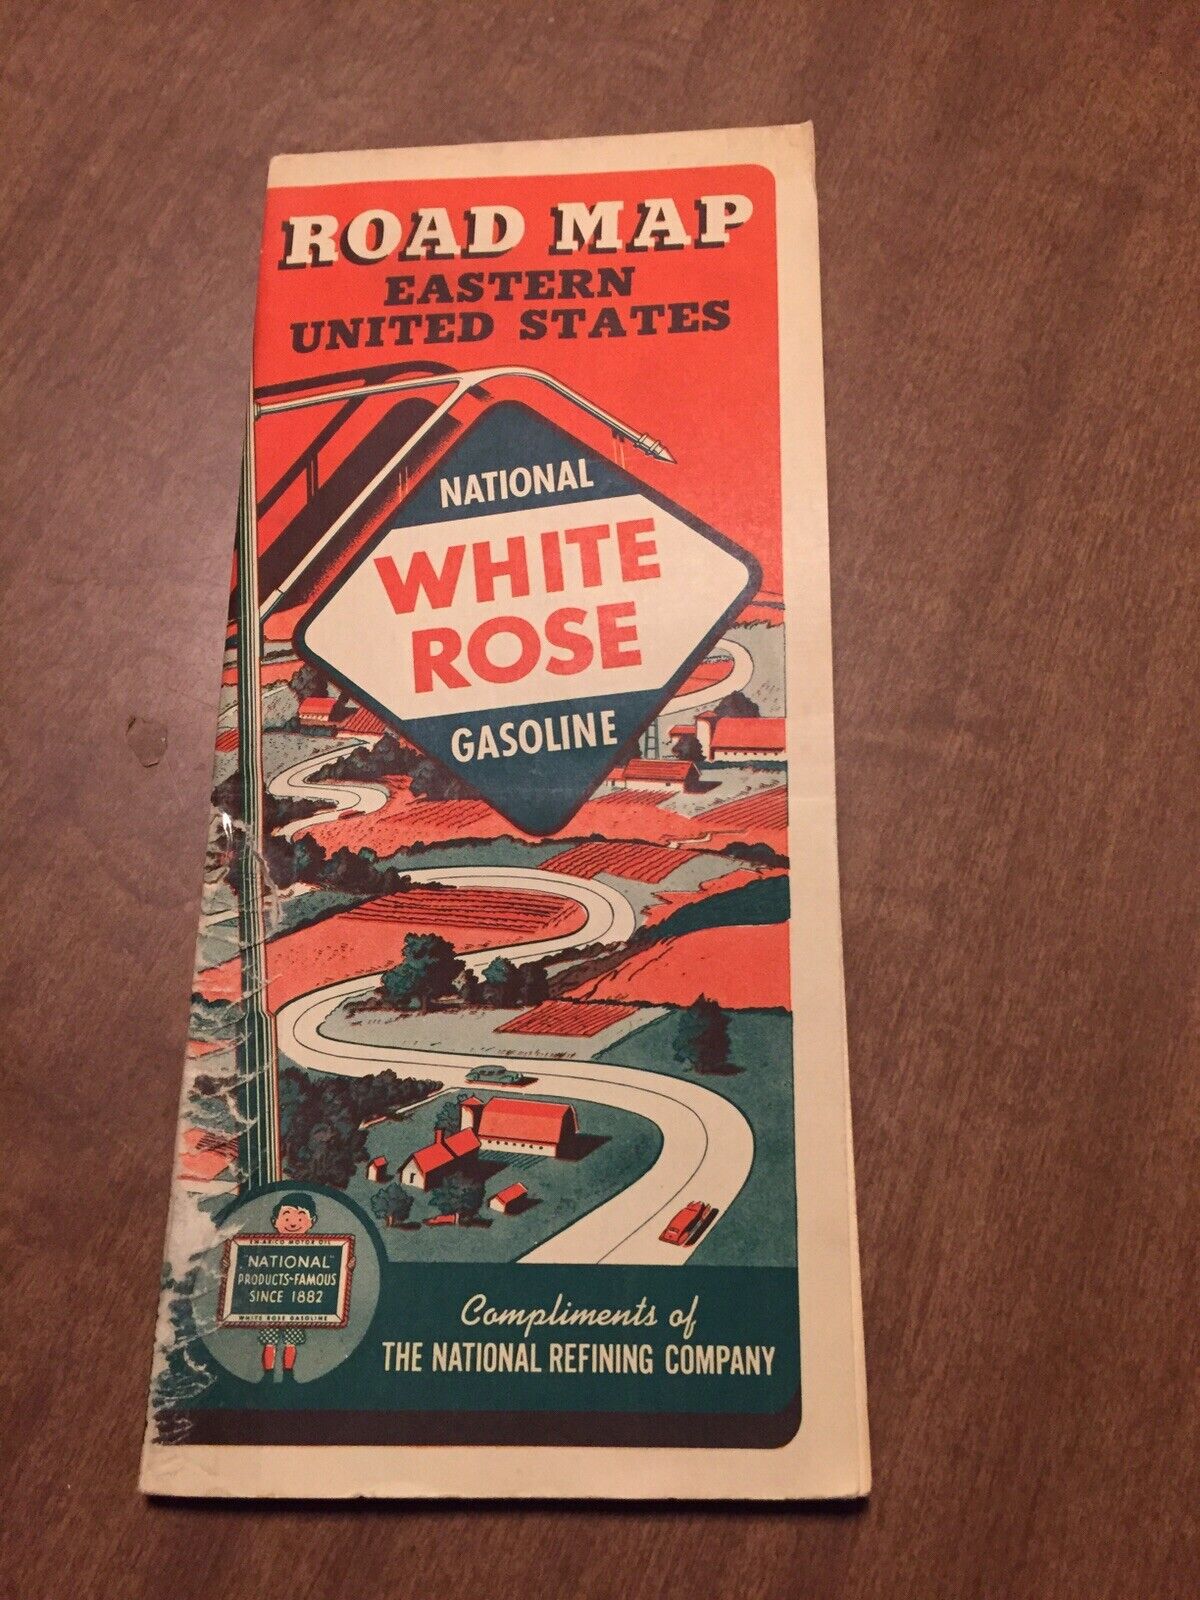 Rare Vintage 1940\'s White Rose Gasoline Travel Map of Eastern United States GC 